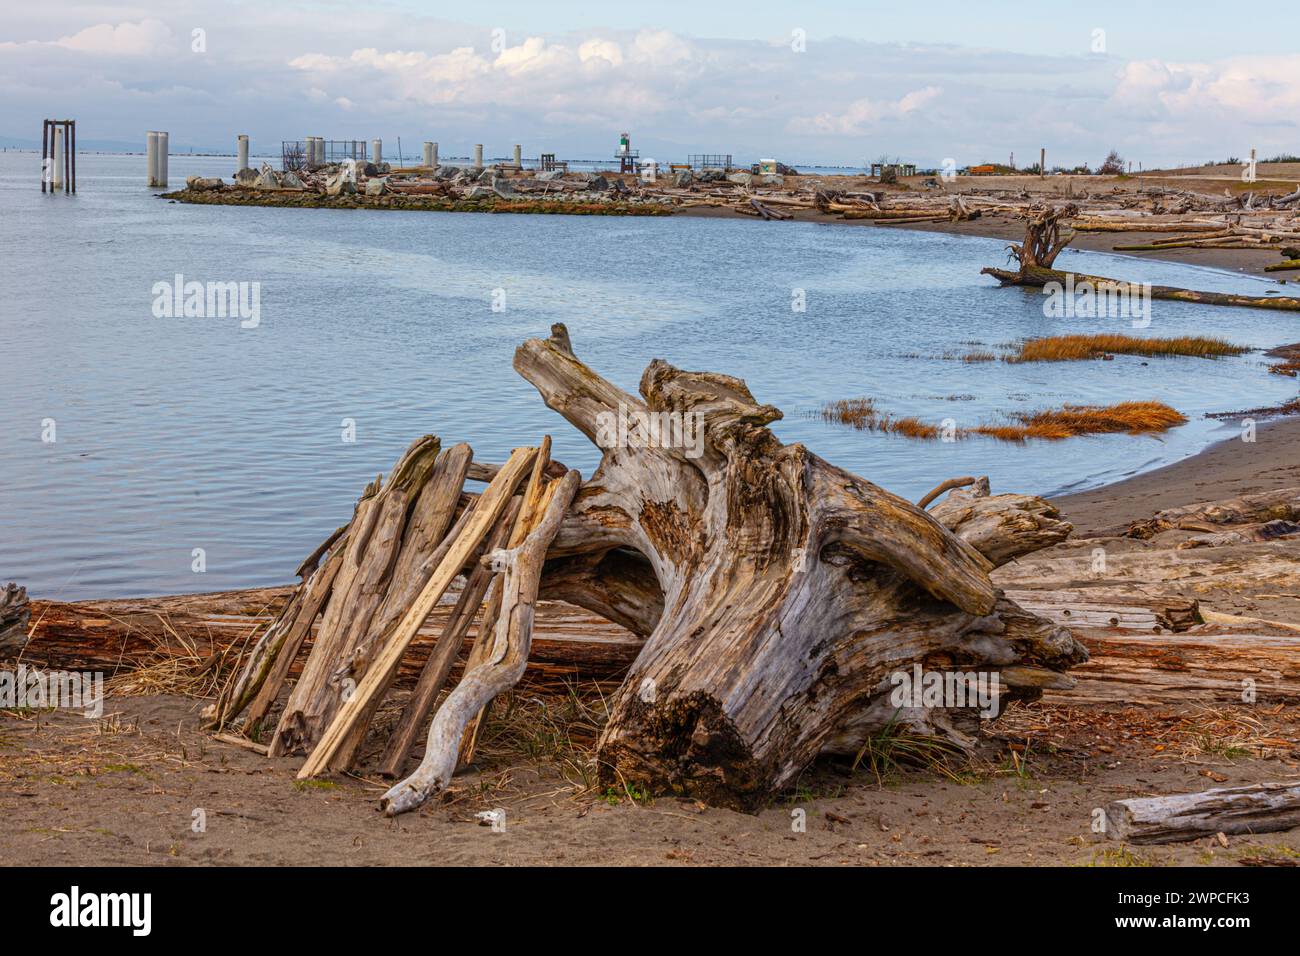 Children's play structure made from driftwood on a beach in Steveston British Columbia Canada Stock Photo